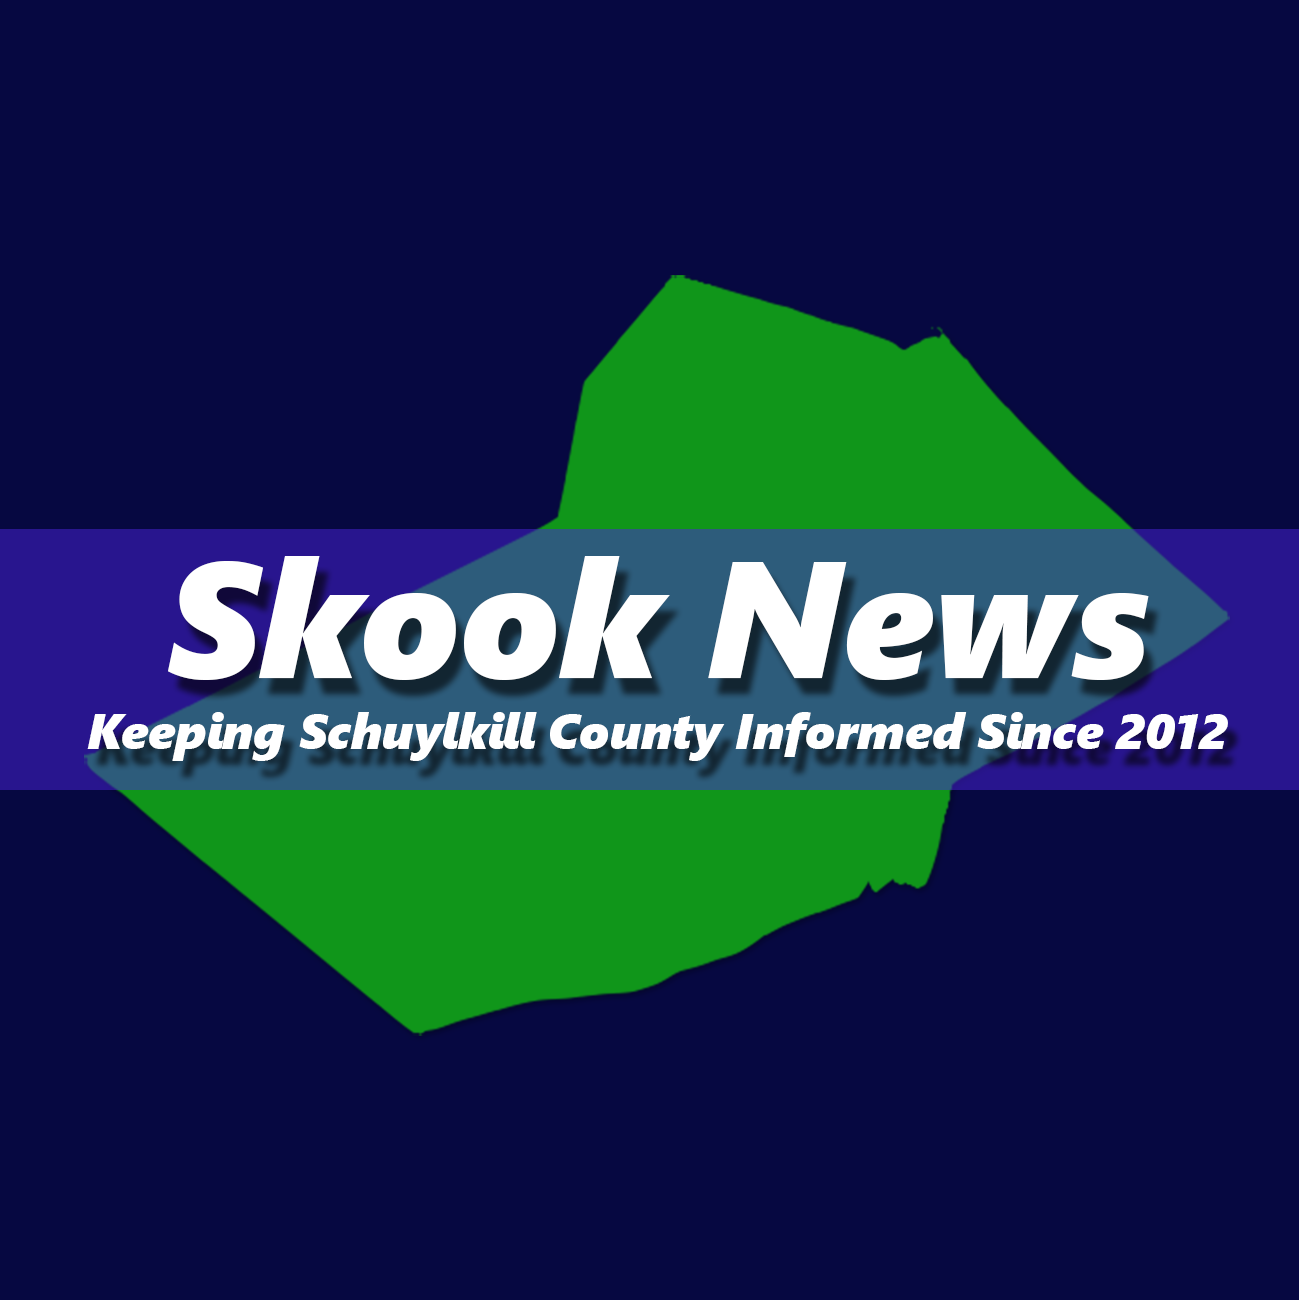 Skook News - Your #1 Source for Schuylkill County News: Schuylkill County  Landmark to be Featured on United States Postal Stamp